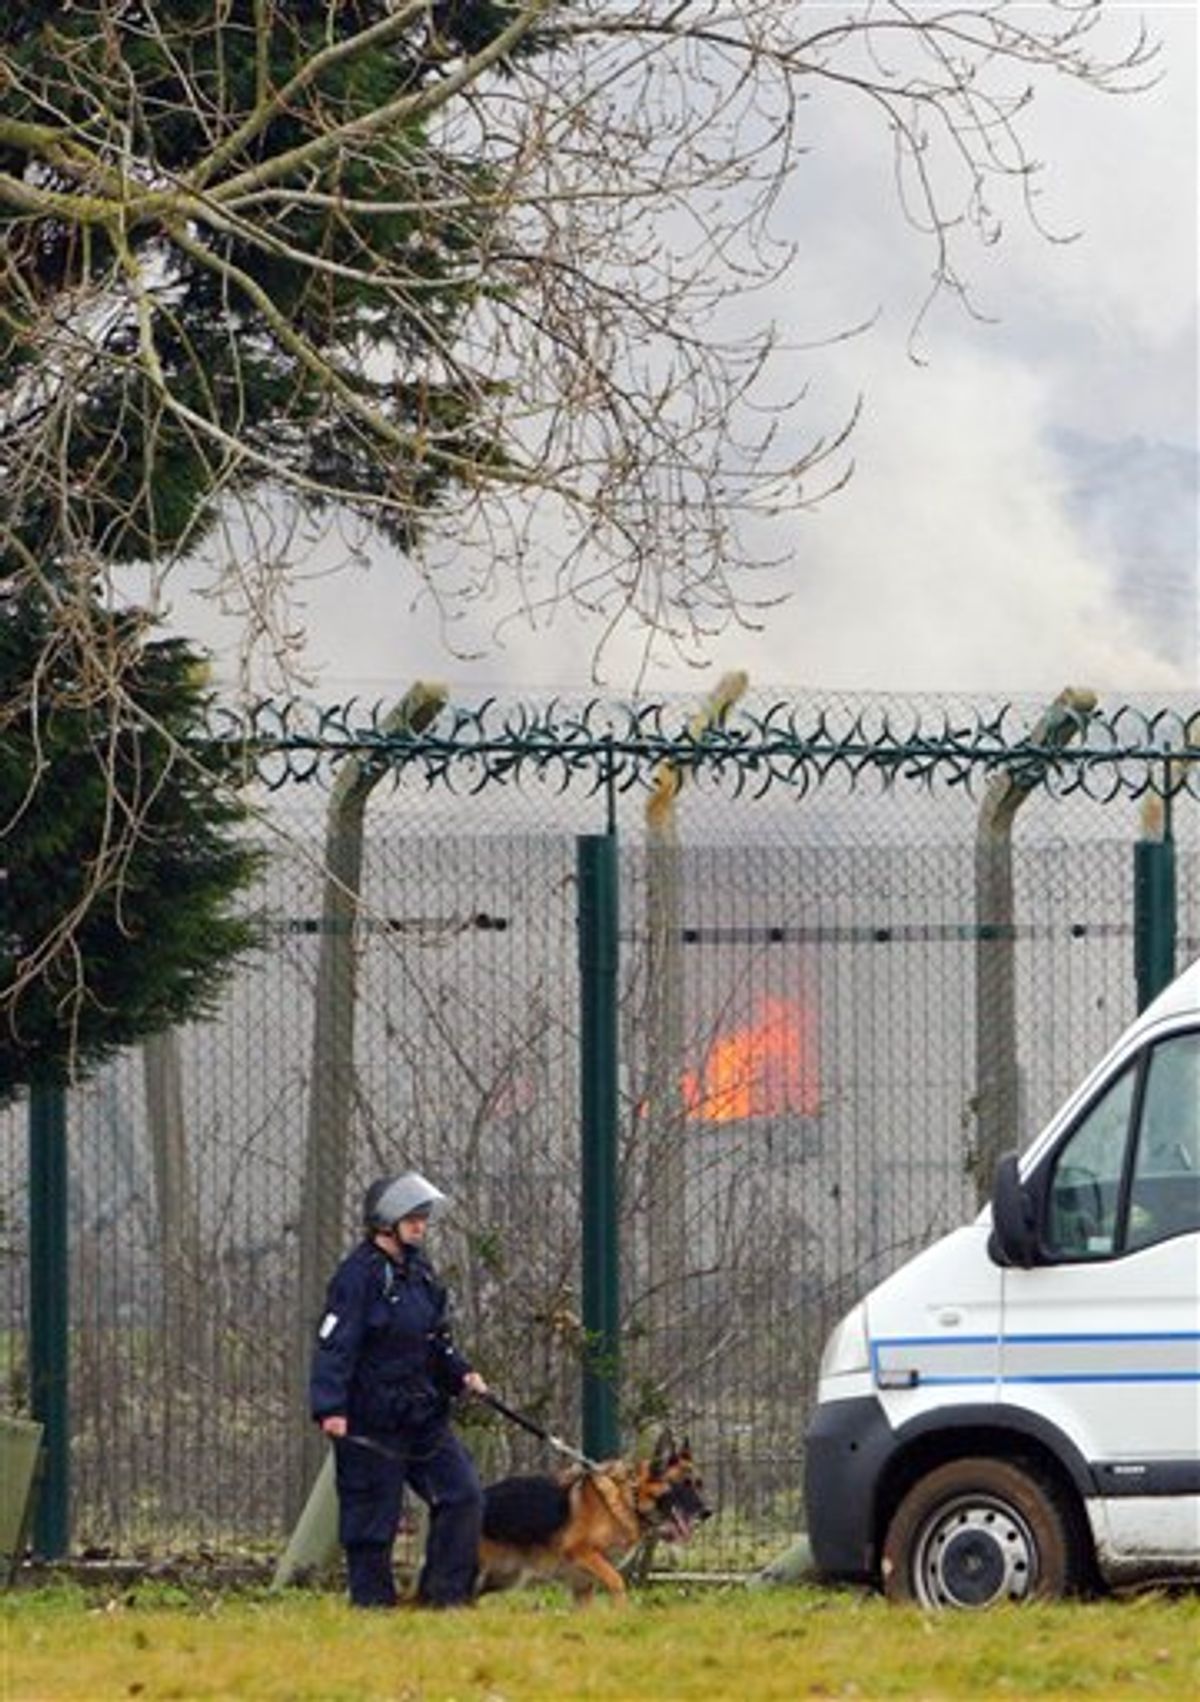 a specialist prison officer dog handler patrols outside the perimeter fence of Ford Prison near Arundel, south England, as the gymnasium building burns in background after about 40 prisoners began a riot and set alight to parts of the open prison, according to the a Ministry of Justice official, Saturday Jan. 1, 2011. (AP Photo / Chris Ison, PA) UNITED KINGDOM OUT - NO SALES - NO ARCHIVES  (AP)